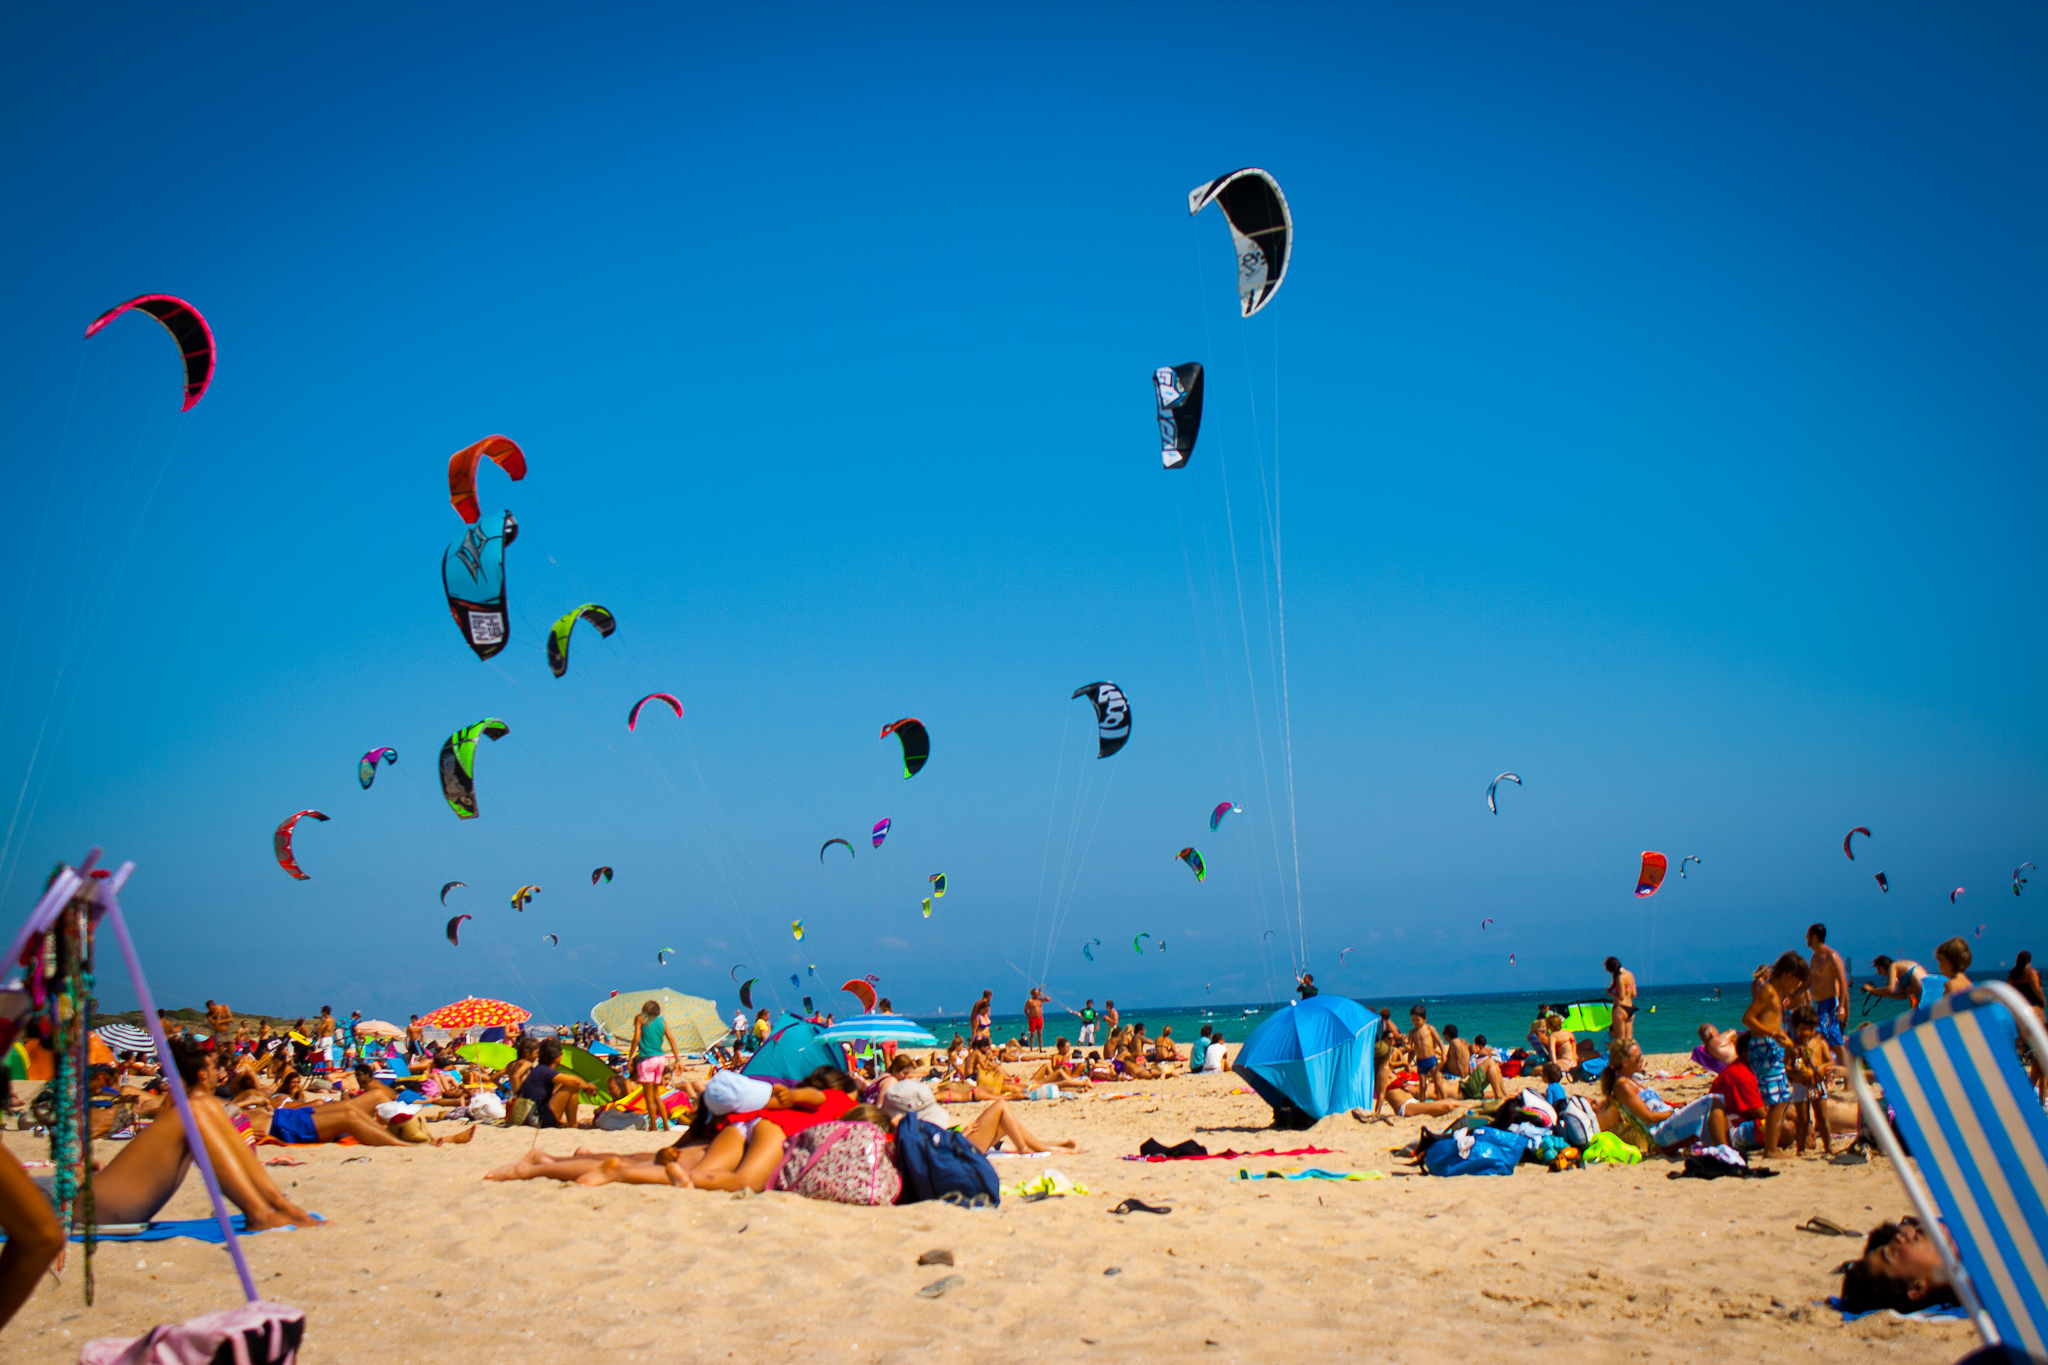 Kitesurfing in Tarifa – A Holiday with a Difference